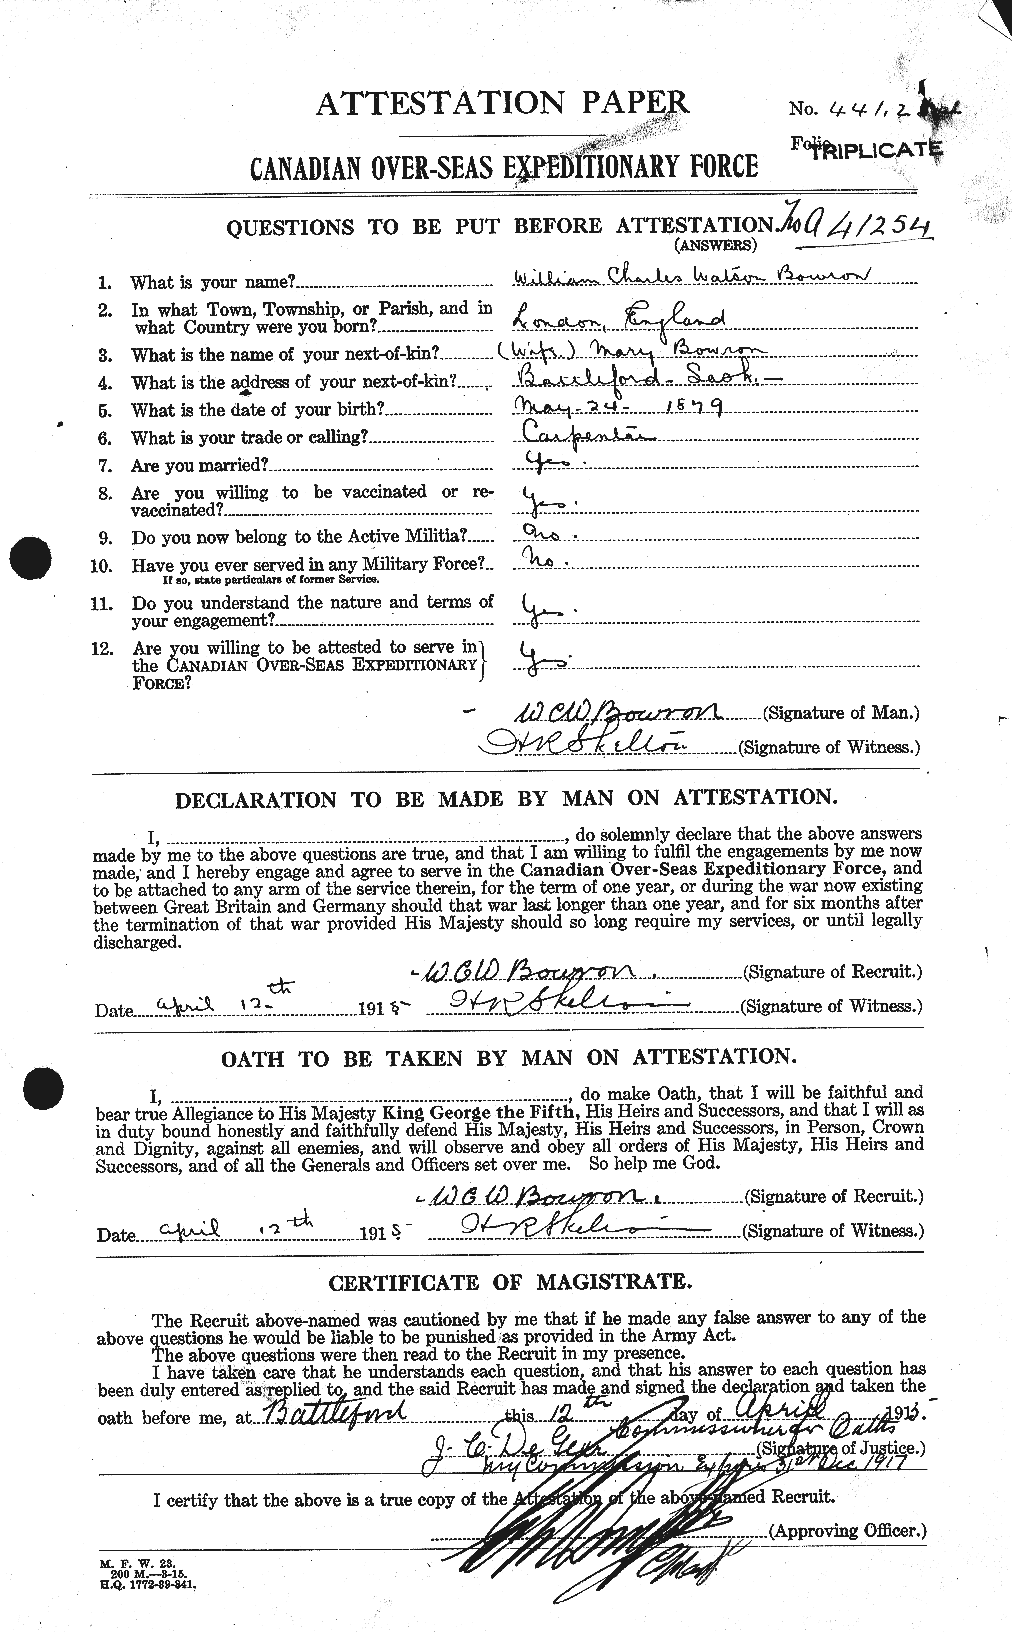 Personnel Records of the First World War - CEF 256242a